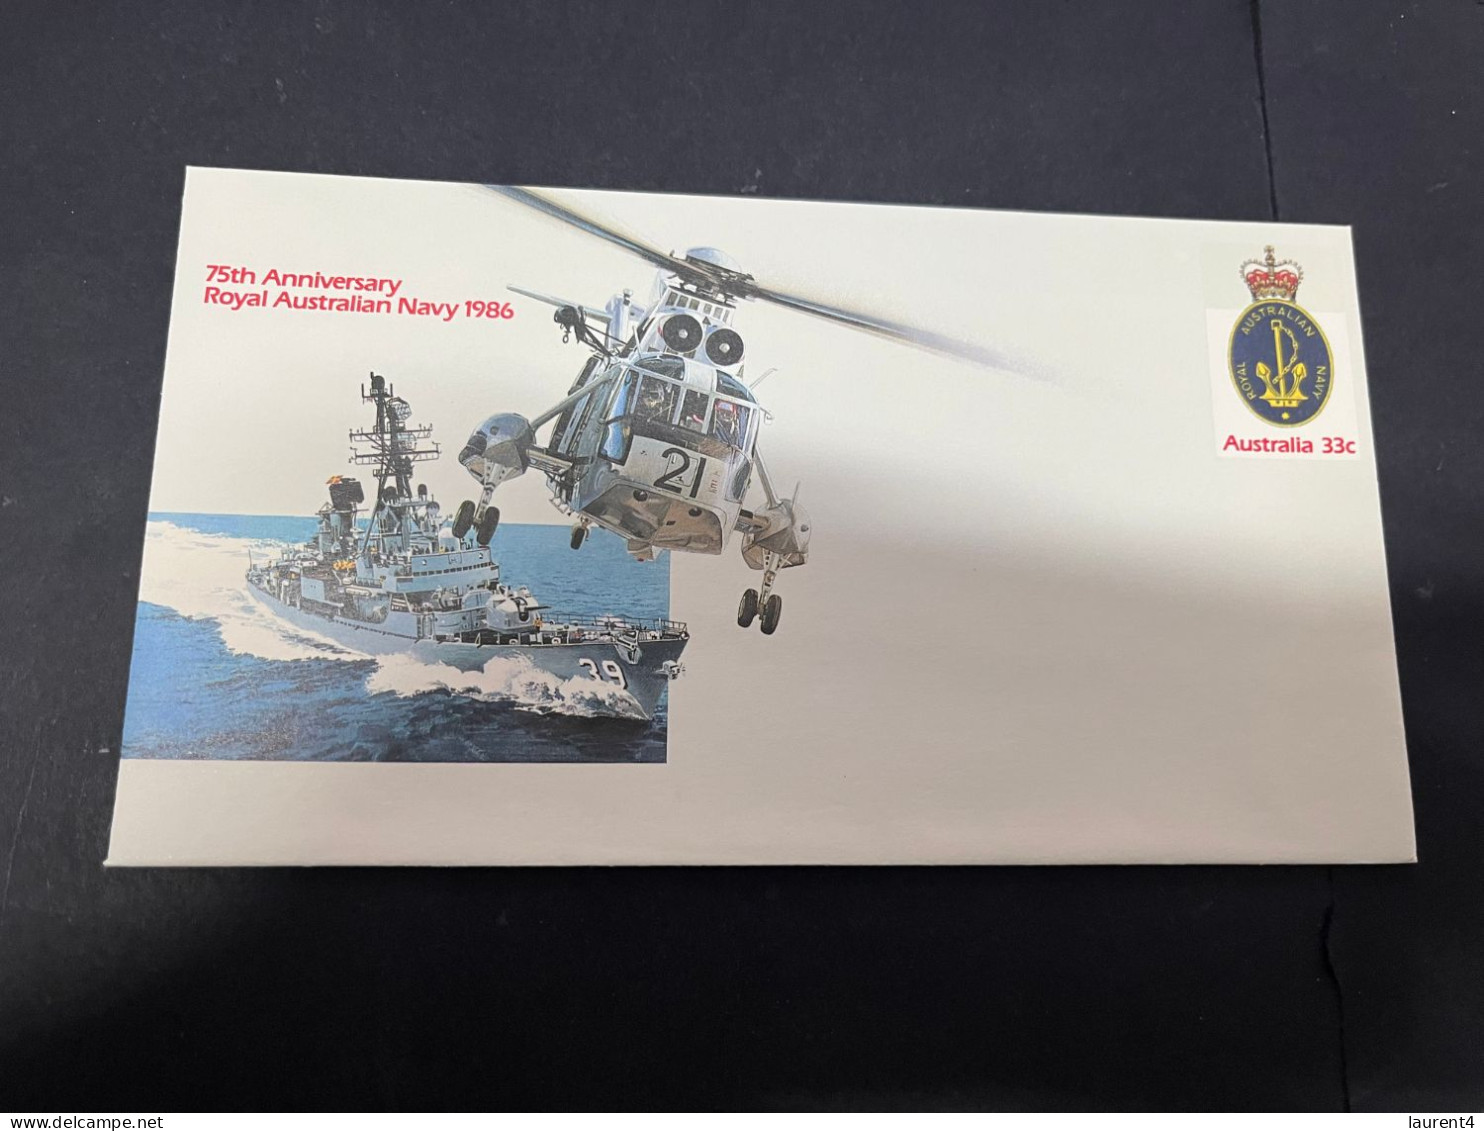 17-4-2024 (2 X 19) Australia - 1986 - 75th Anniversary Of The Royal Australian Navy (3 Covers) - Premiers Jours (FDC)